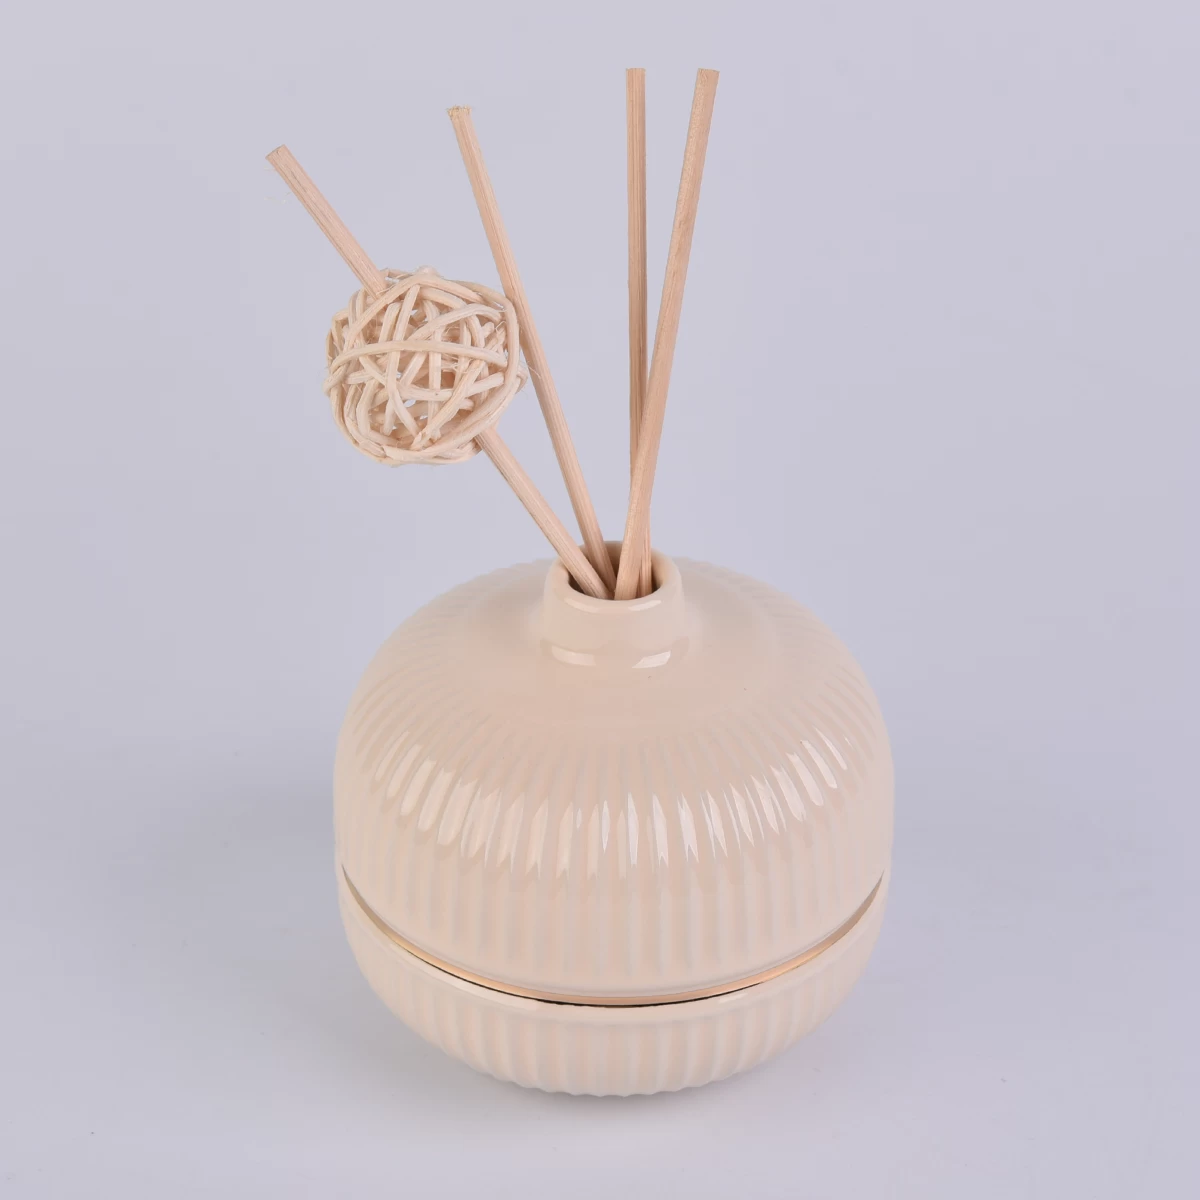 round ceramic bottle in nude color with gold ring, ceramic diffuser bottles